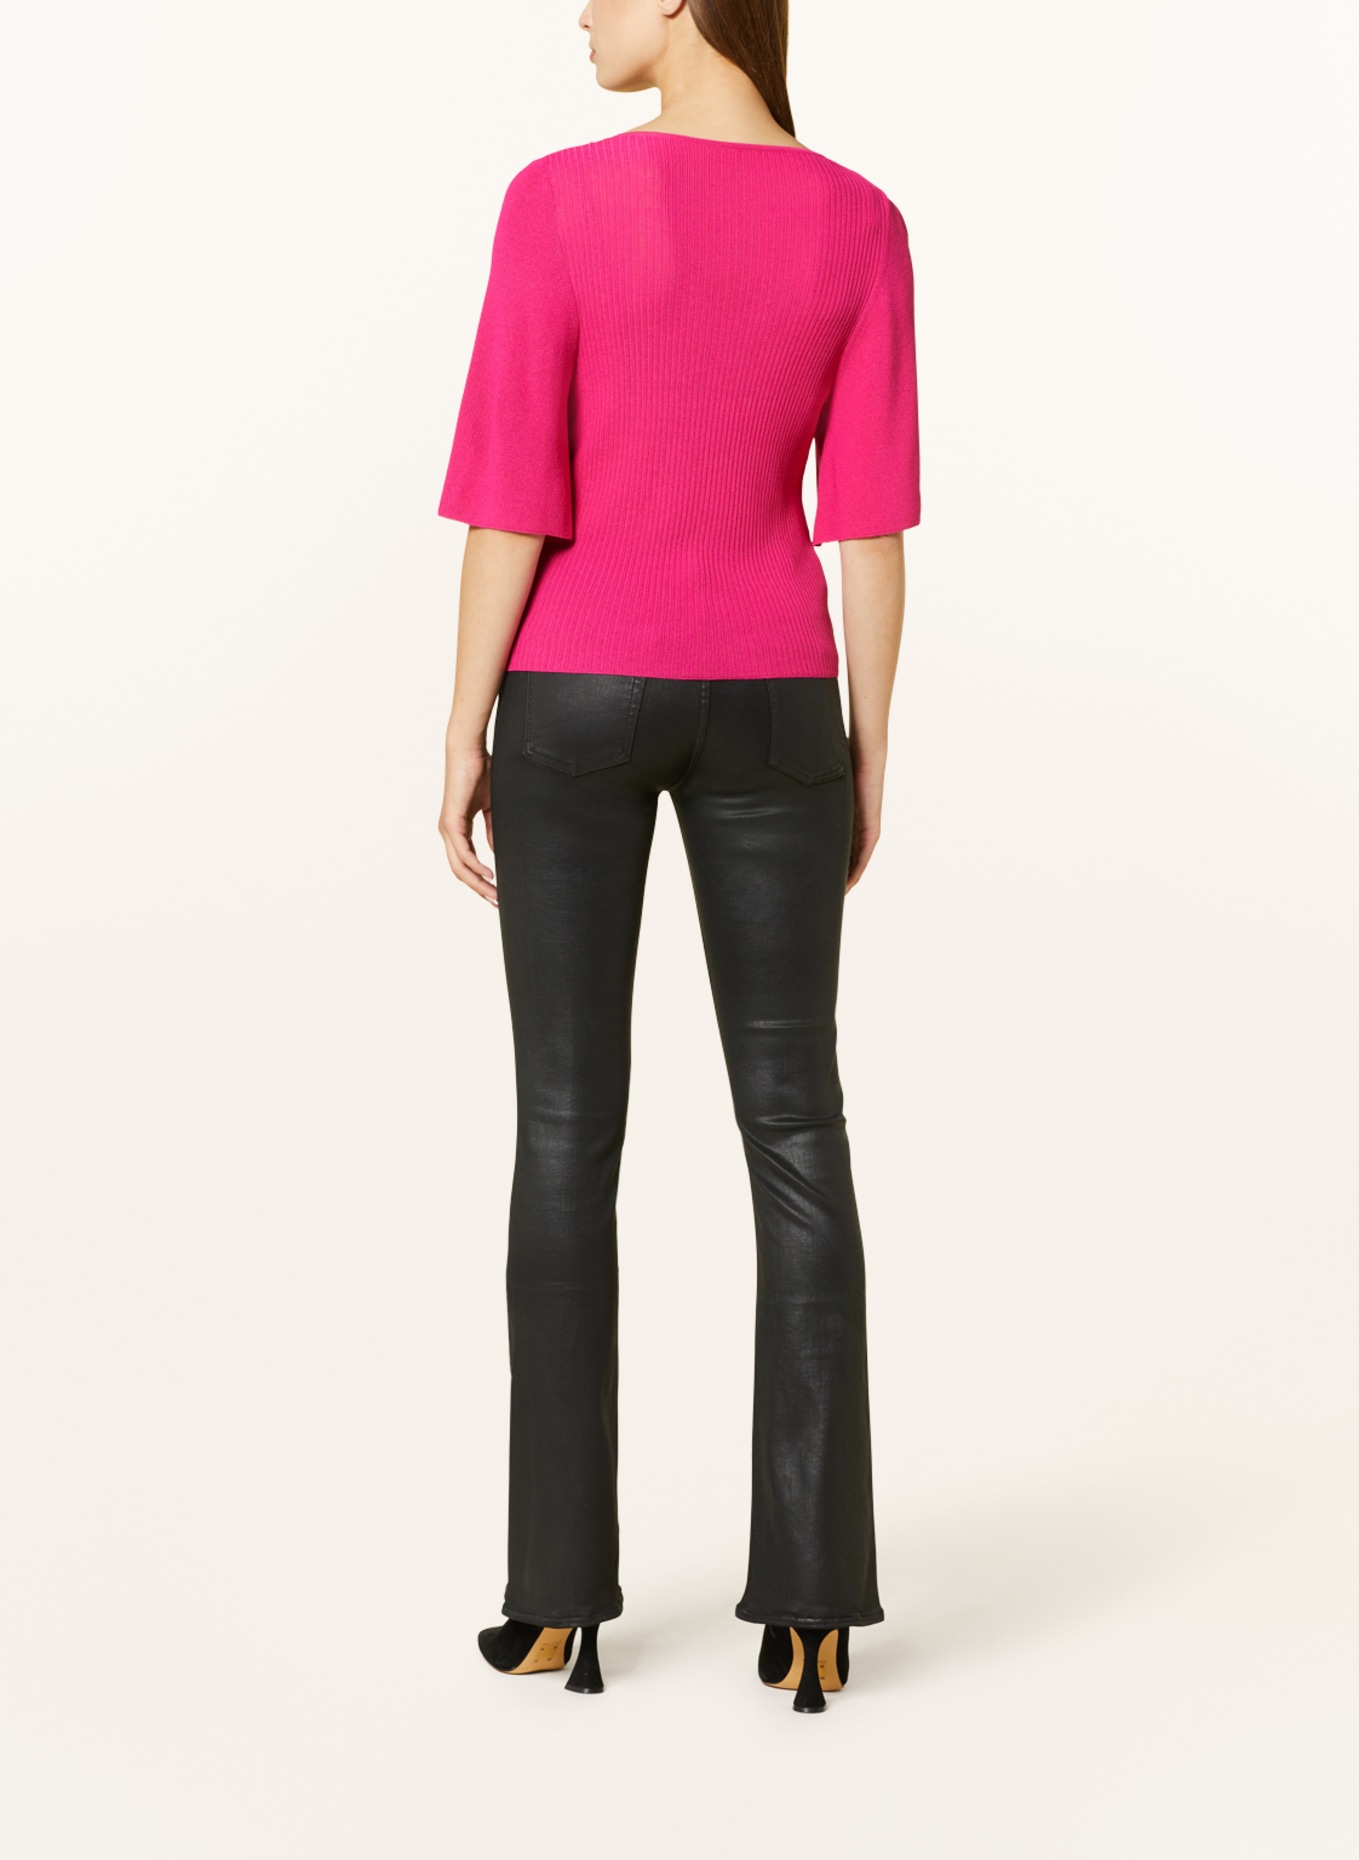 RIANI Knit shirt with 3/4 sleeves, Color: PINK (Image 3)